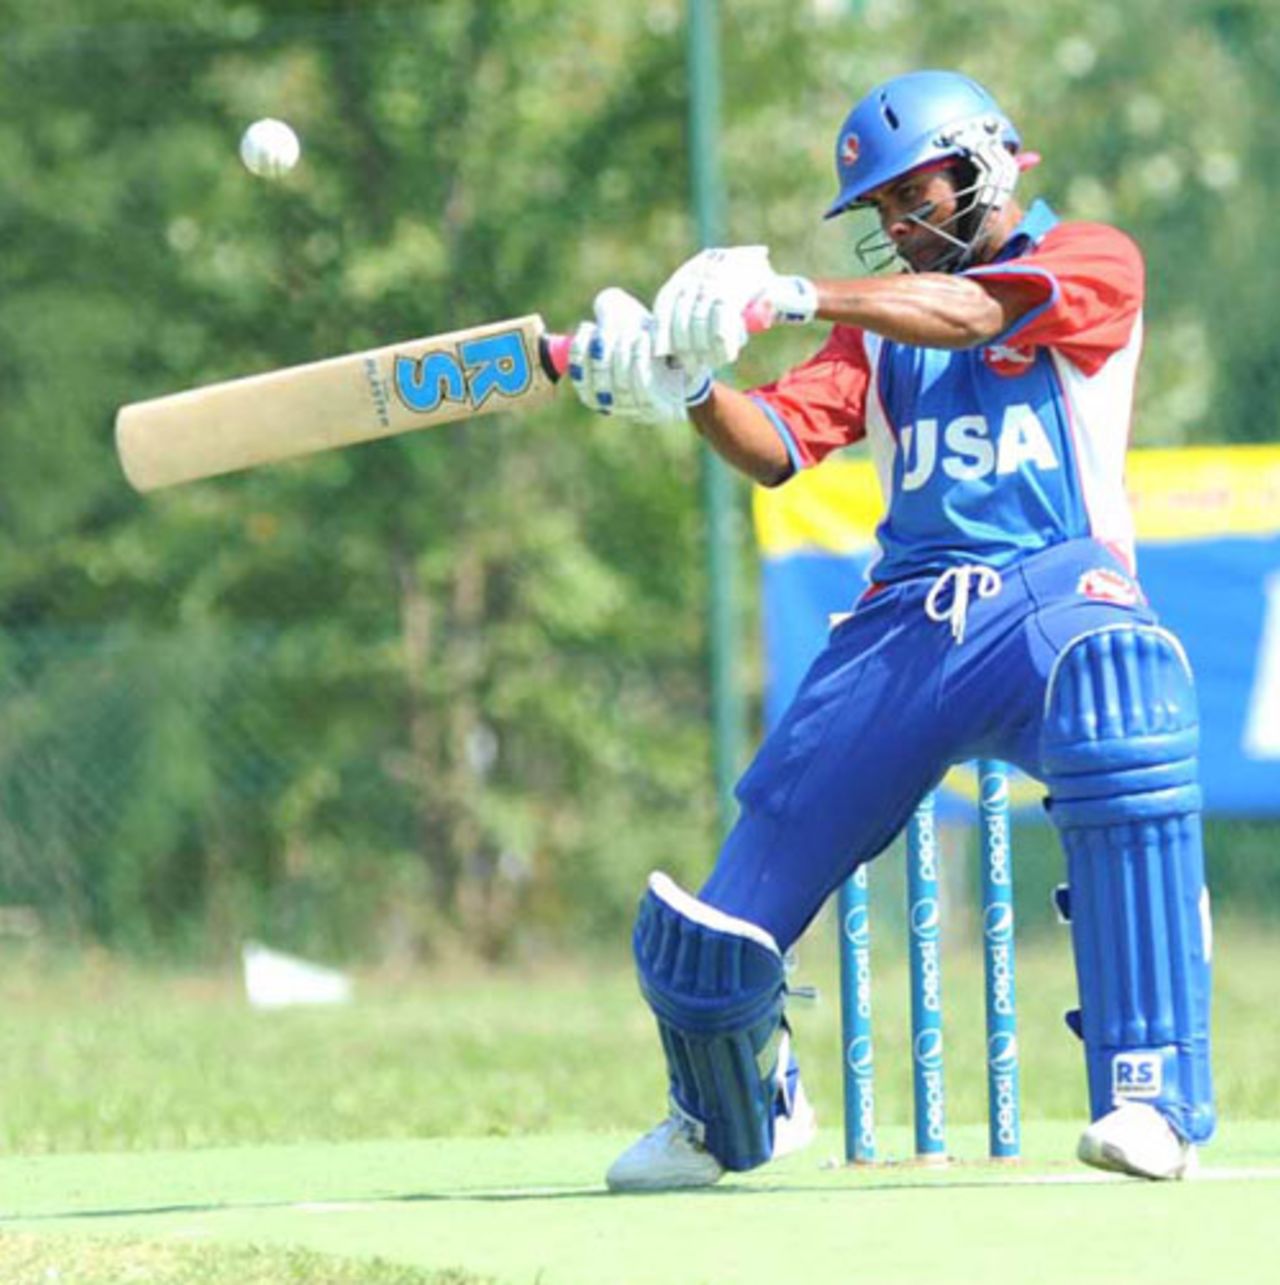 USA's Steve Massiah plays the cut, Nepal v USA, ICC WCL Div. 4, Pianoro, August 19, 2010